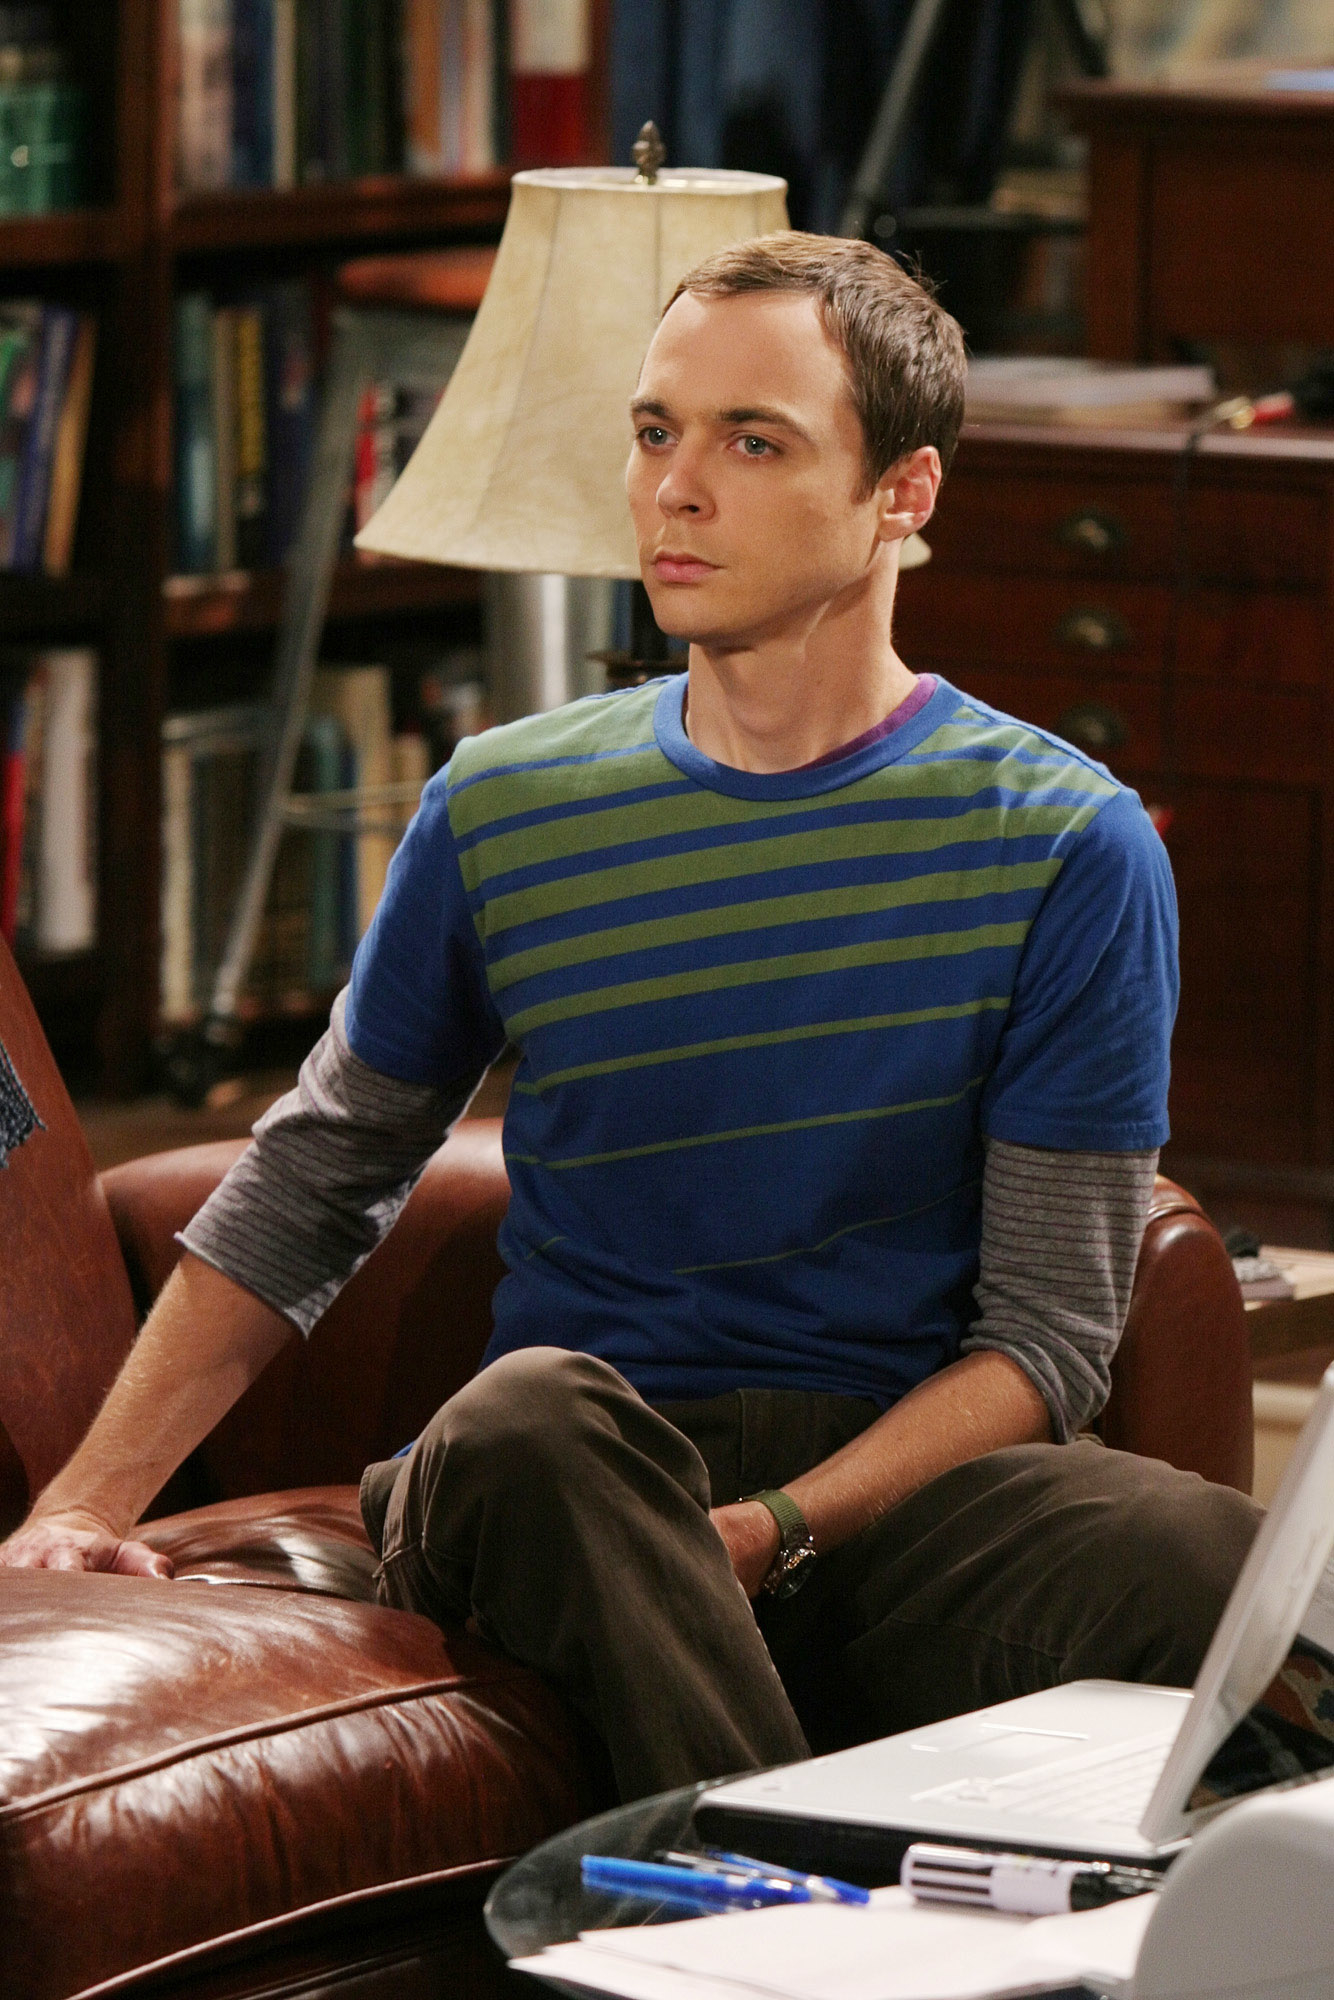 Sheldon Cooper from The Big Bang Theory sitting on a couch, wearing a striped long-sleeve shirt over a grey one